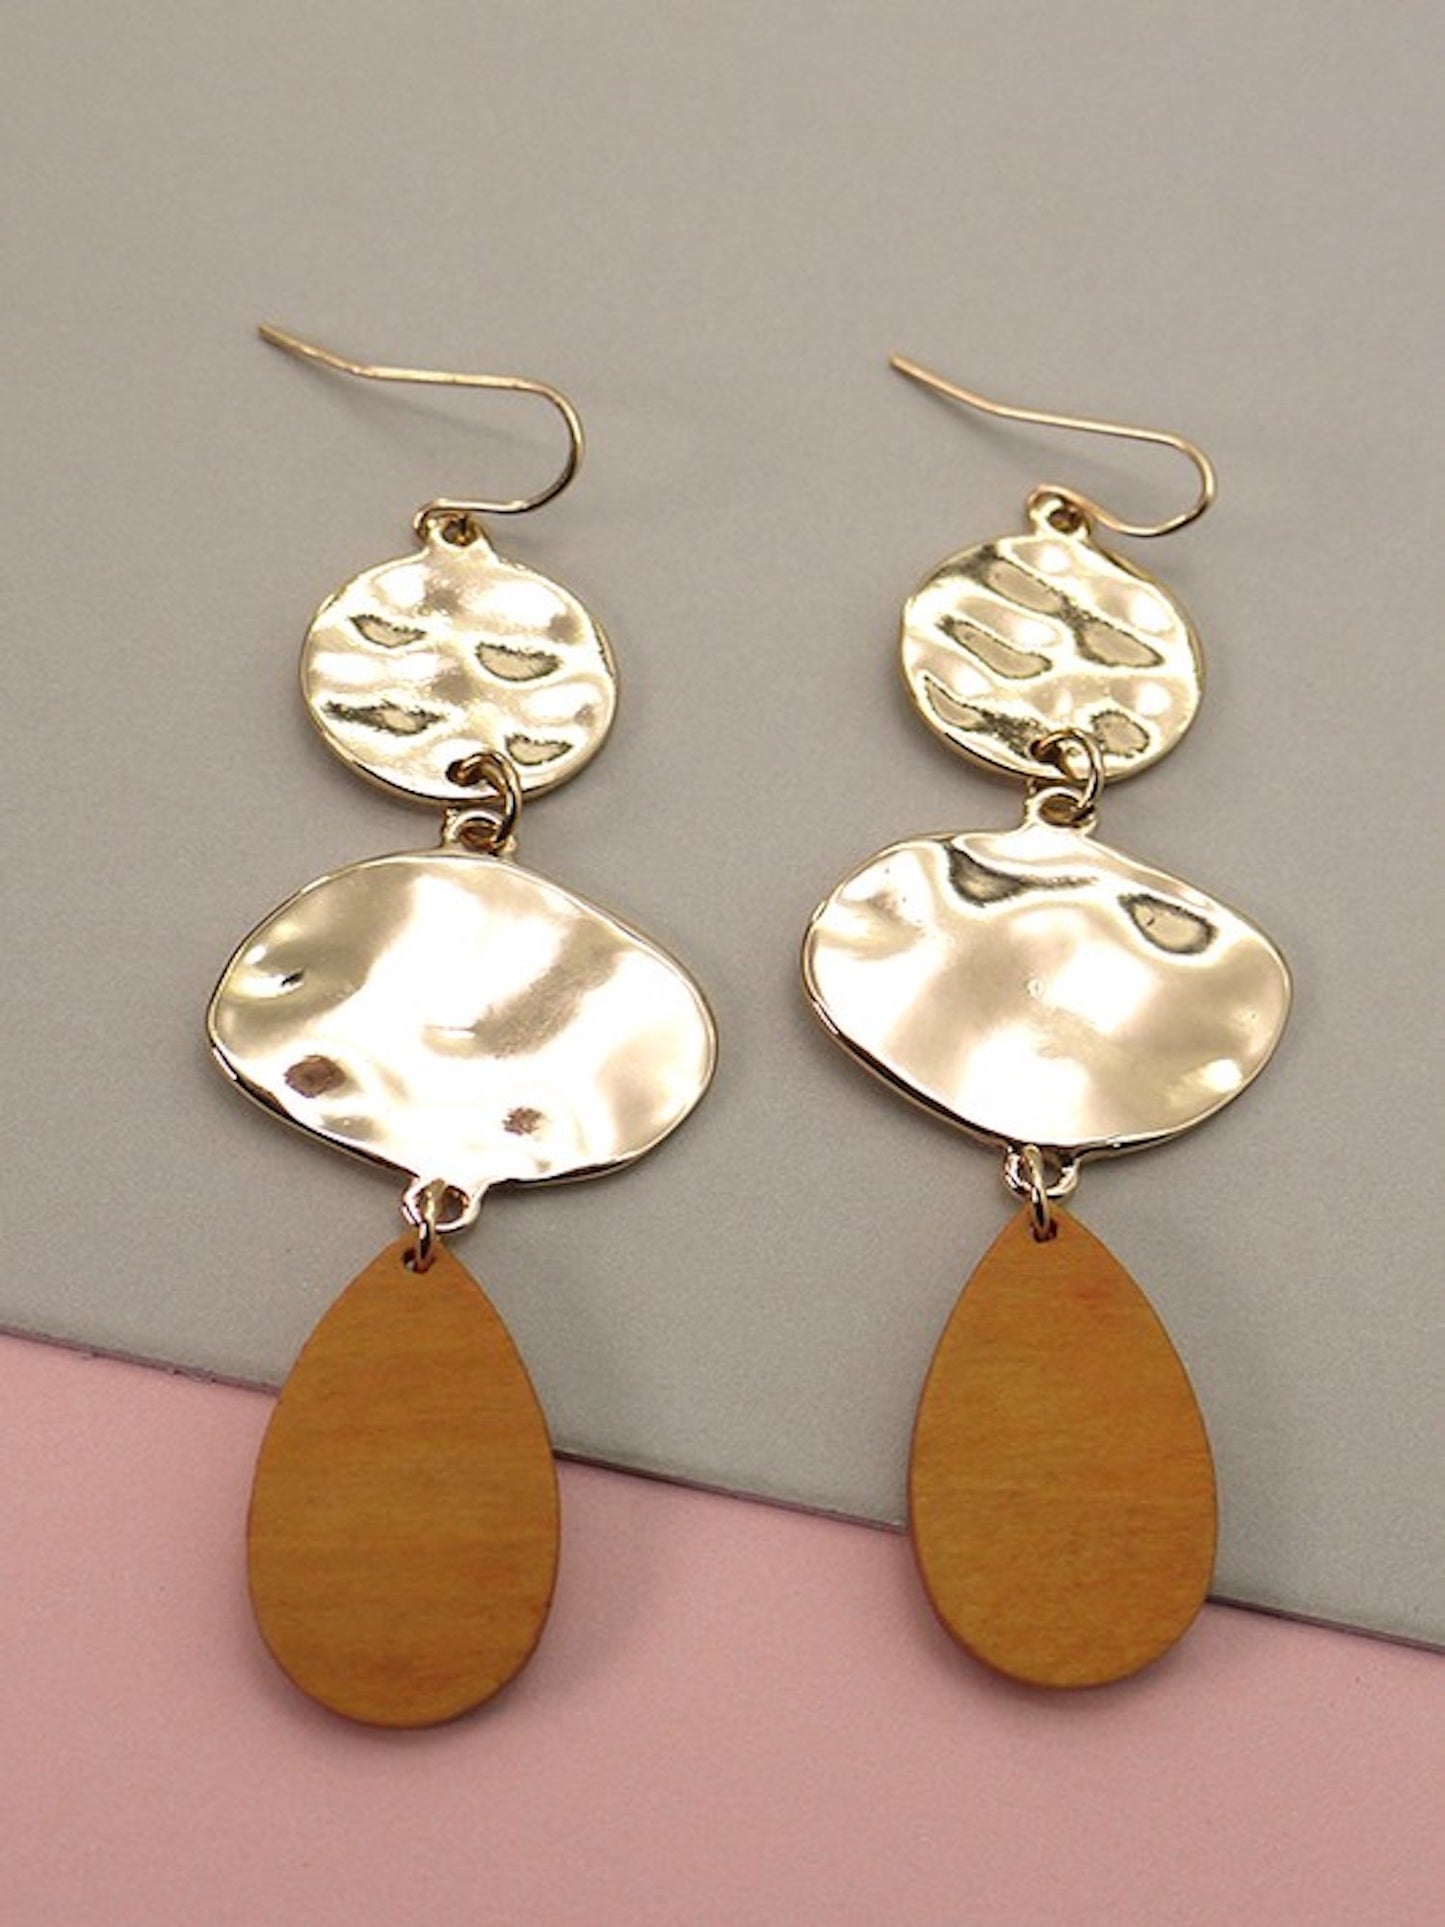 Retro Hammered Earrings-Tan/Gold